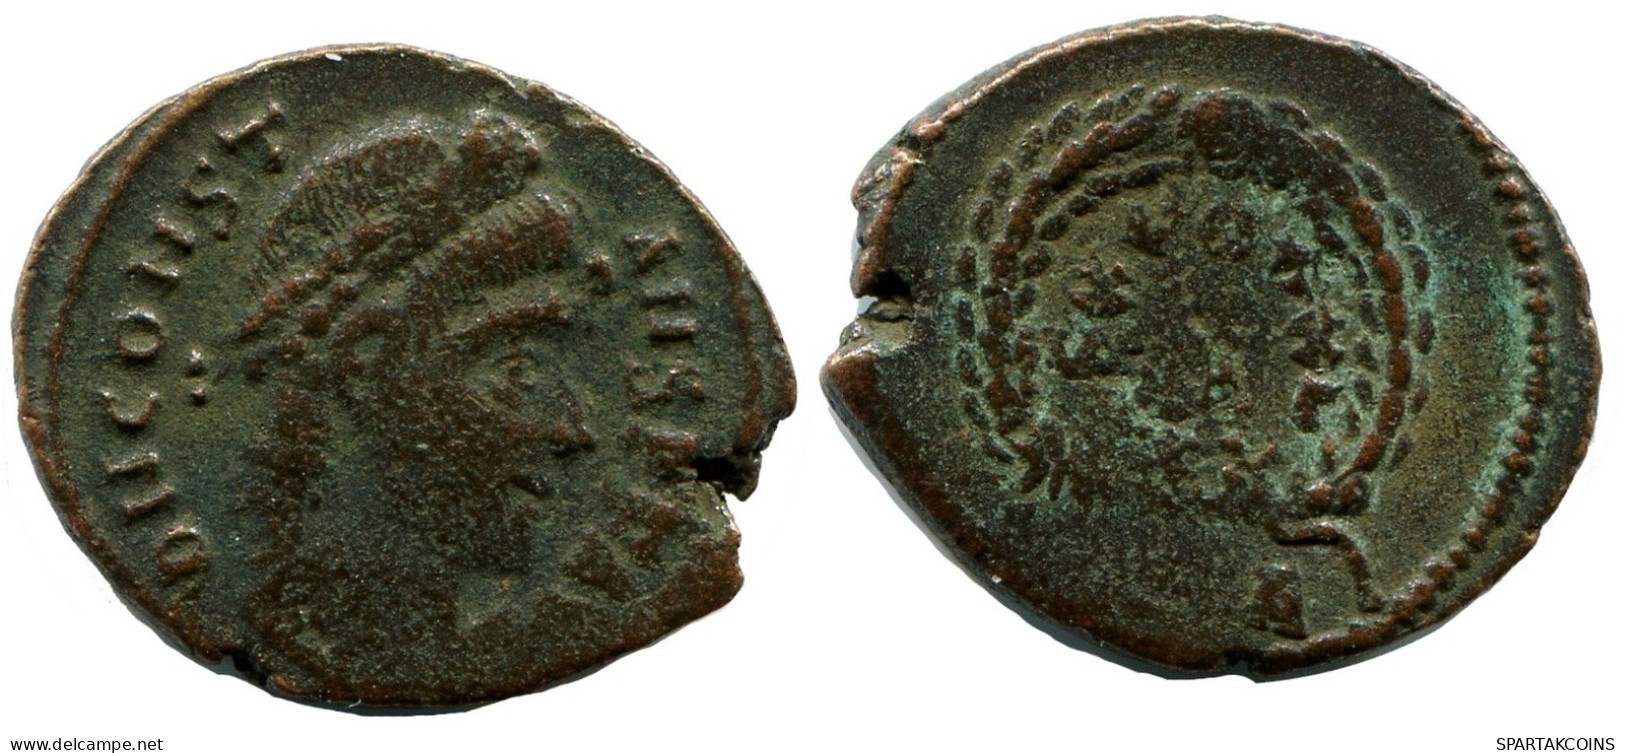 CONSTANS MINTED IN ALEKSANDRIA FROM THE ROYAL ONTARIO MUSEUM #ANC11441.14.U.A - El Imperio Christiano (307 / 363)